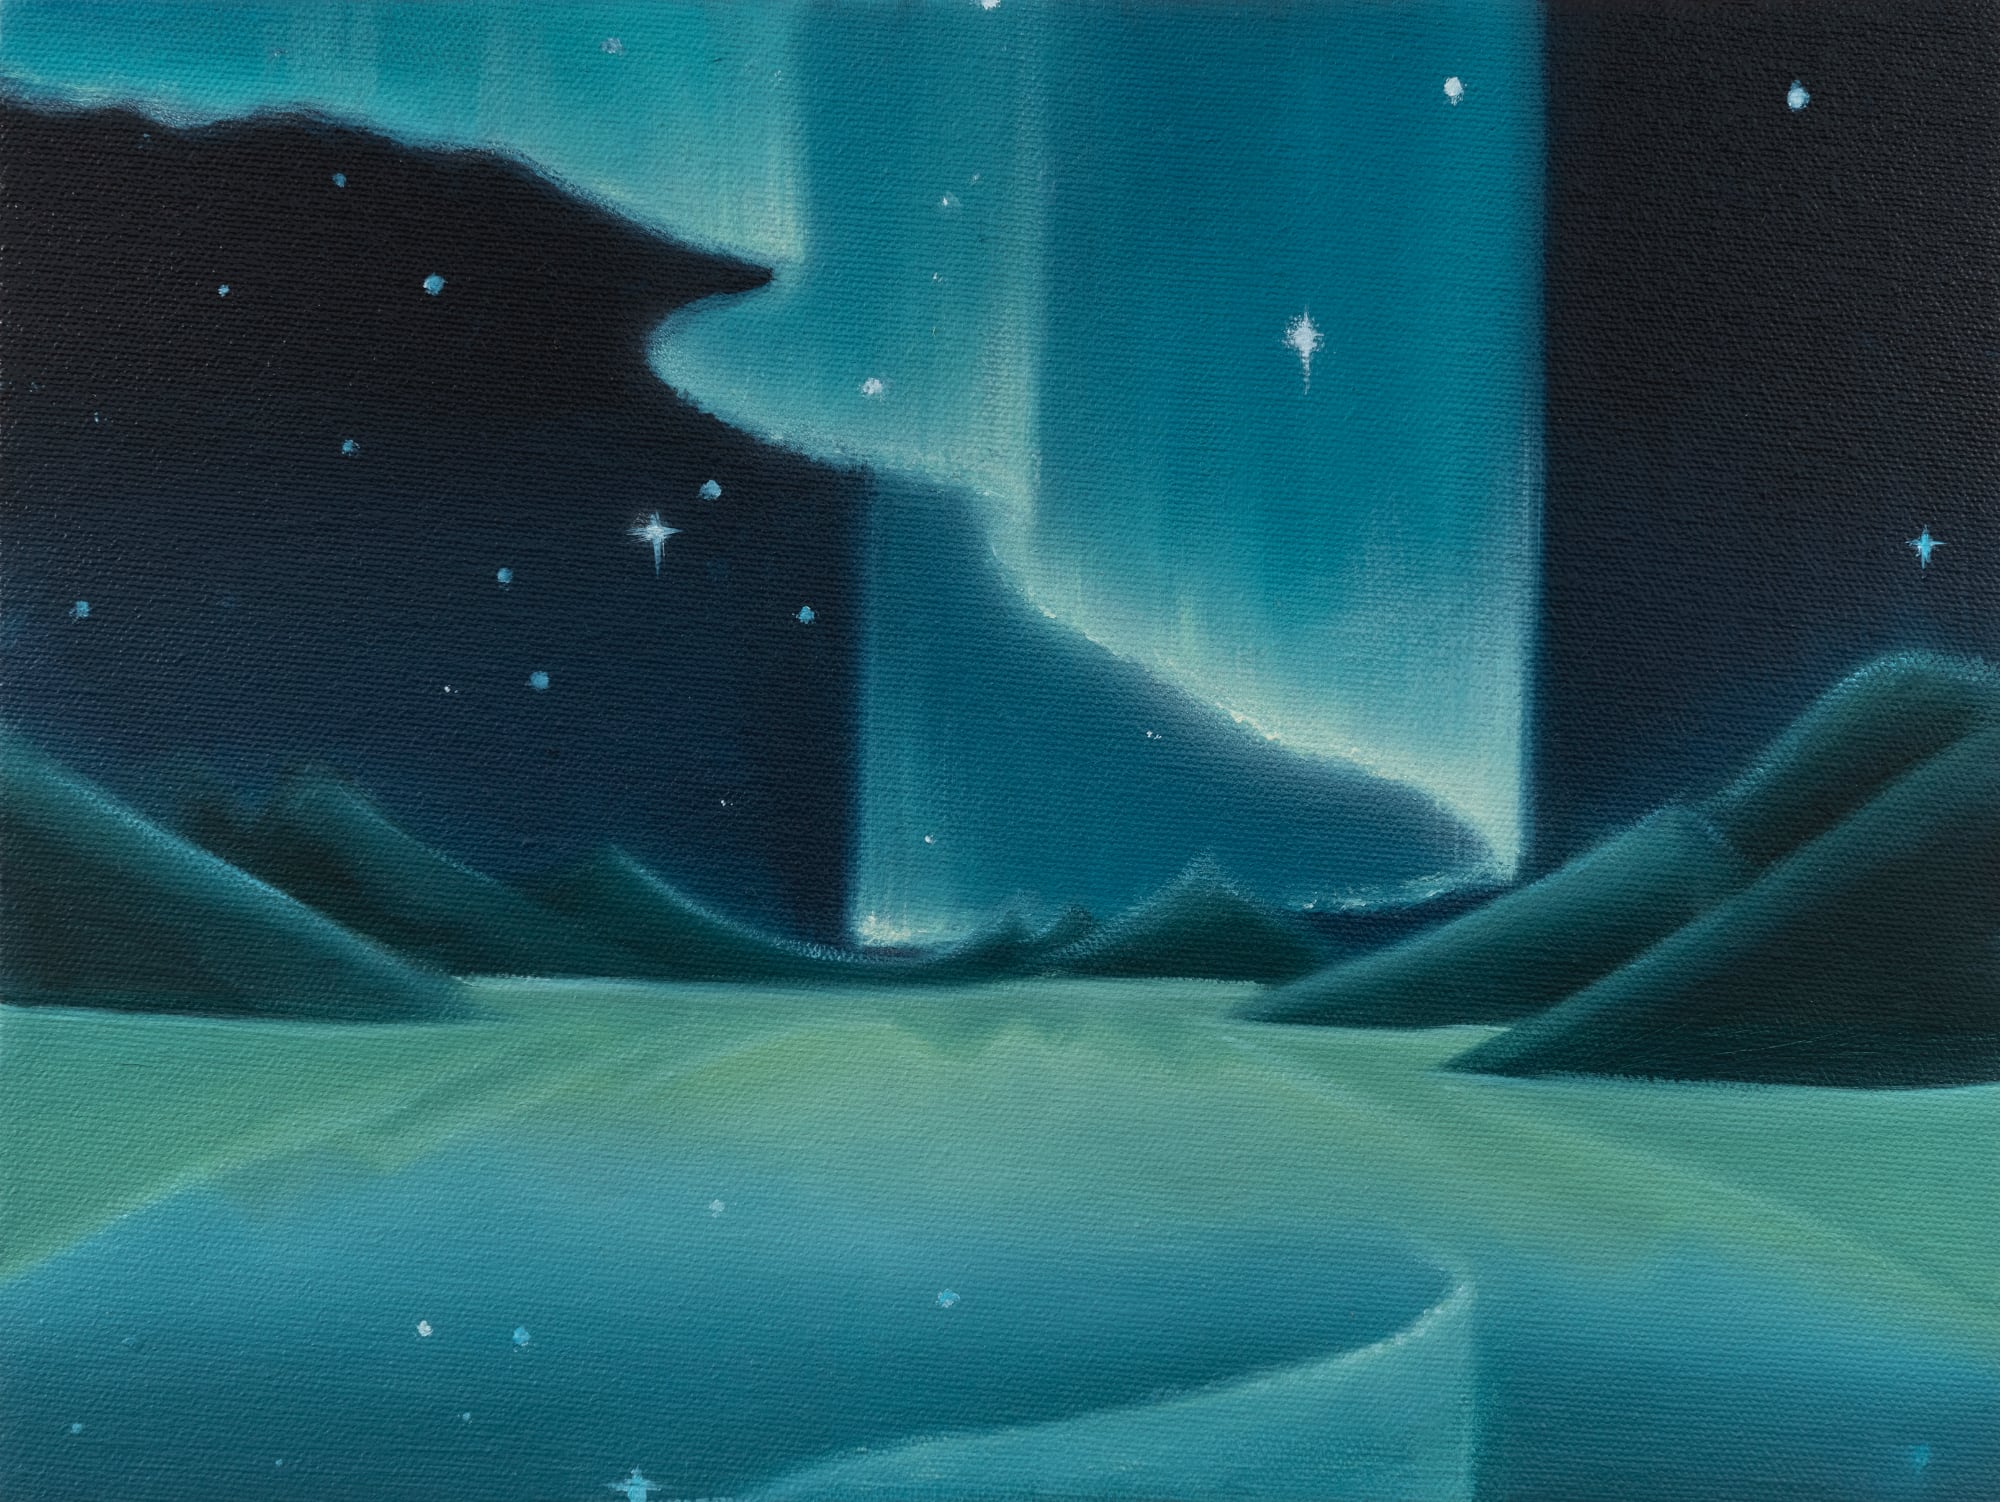 A curtain like expanse of norther lights glows above a quiet landscape